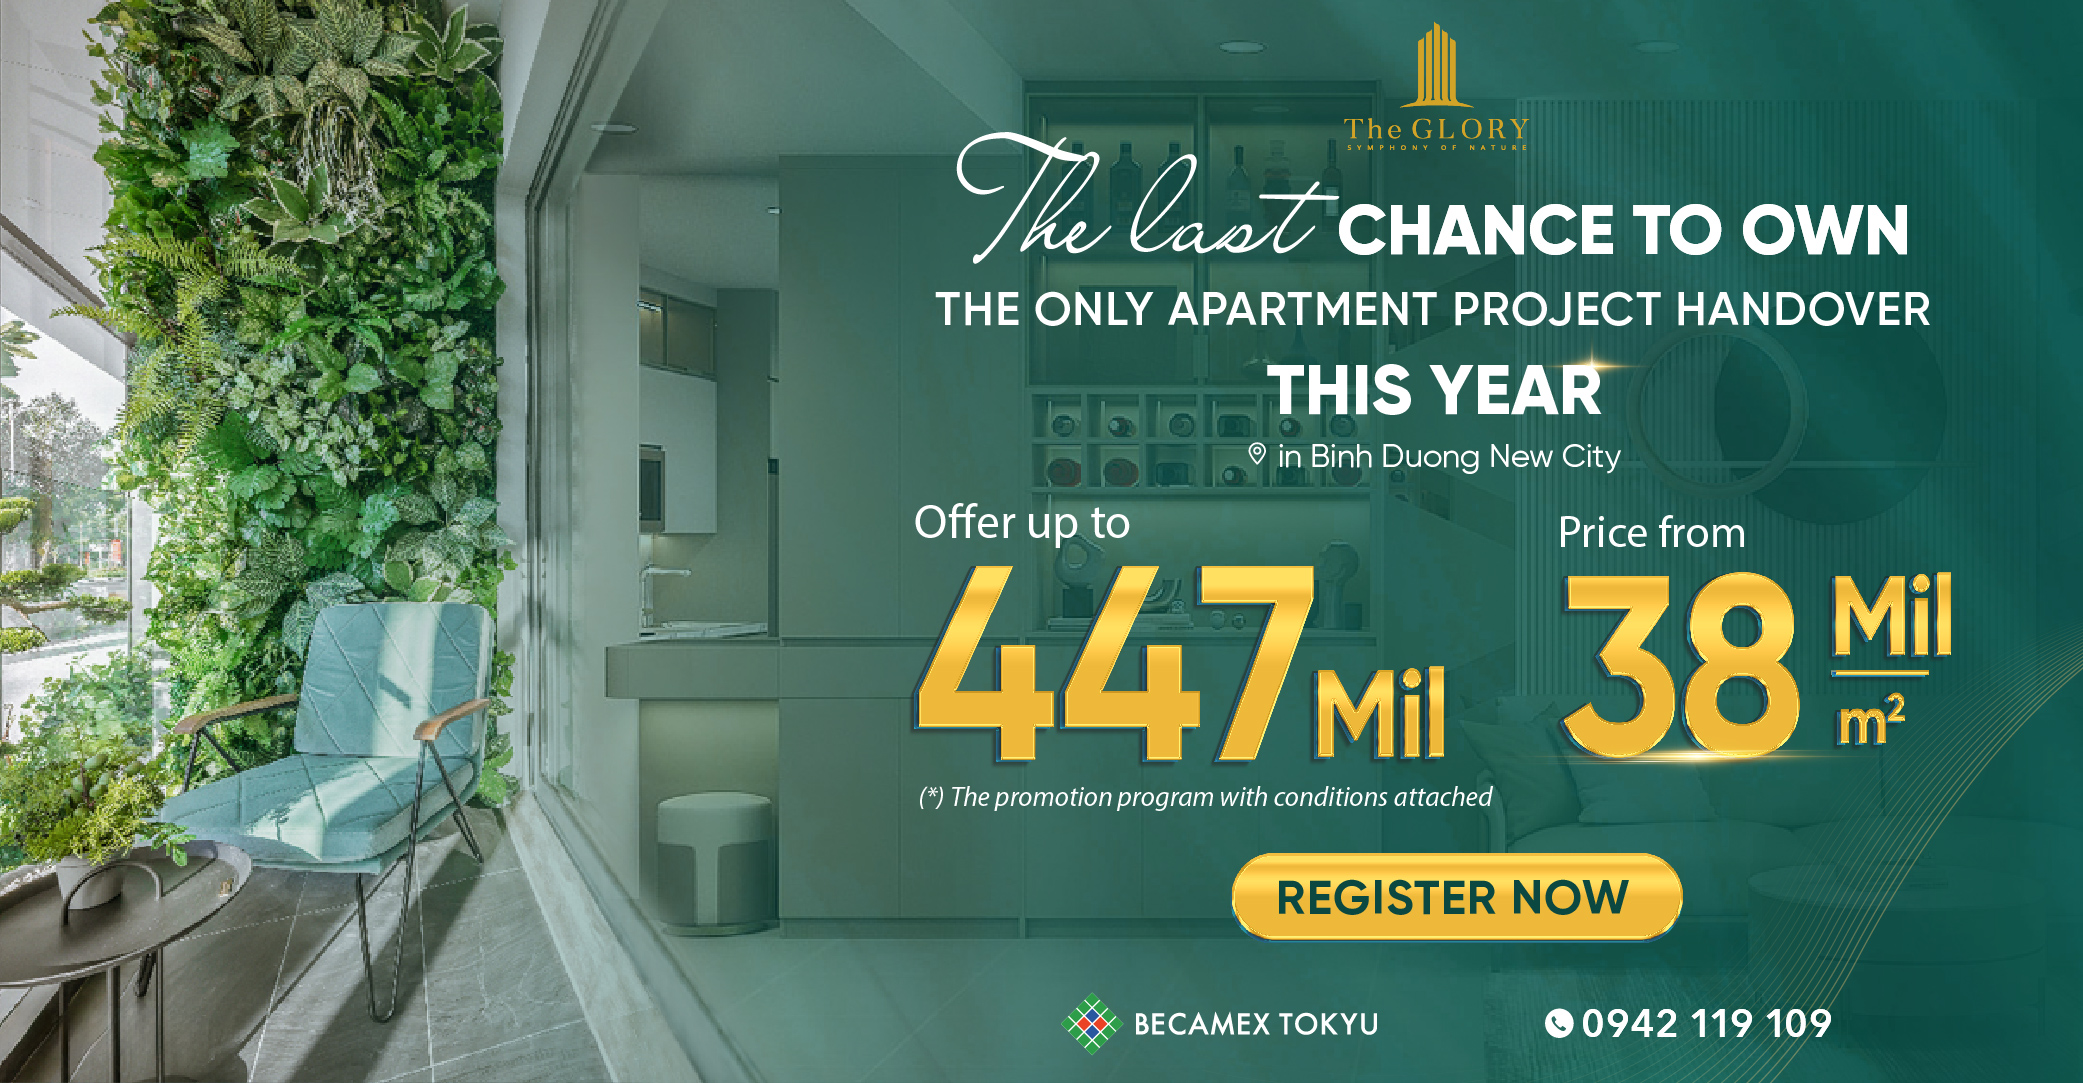 LAST CHANCE WITH SPECIAL PROMOTION UP TO 447 MILLION - OWN The GLORY APARTMENT IN BINH DUONG NEW CITY.